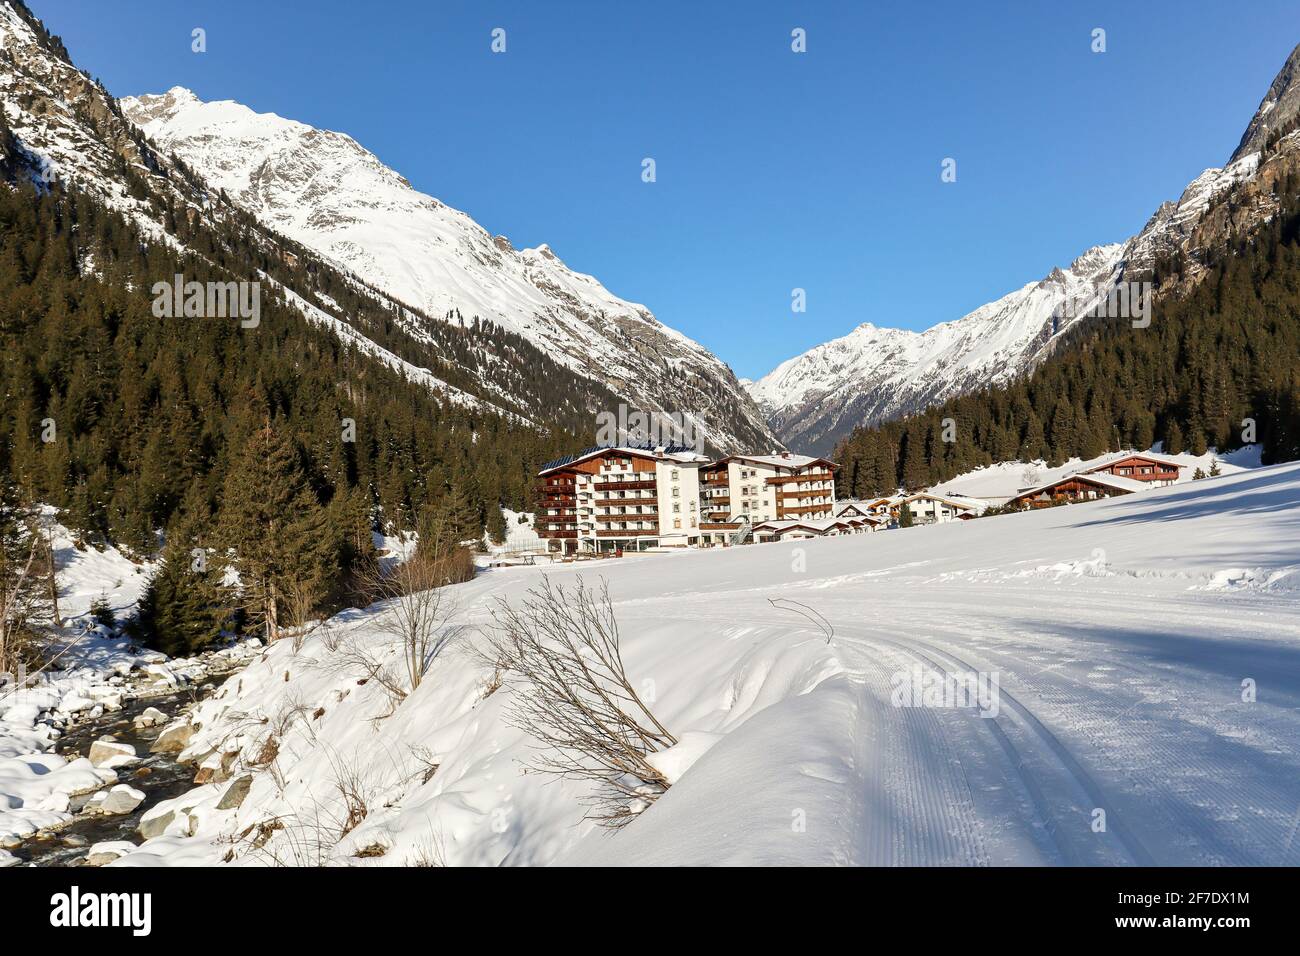 Cross-country skiing trail through the Pitztal near Sankt Leonhard in Tirol, winter sports in snowy landscape in the Austrian Alps, Austria Europe Stock Photo